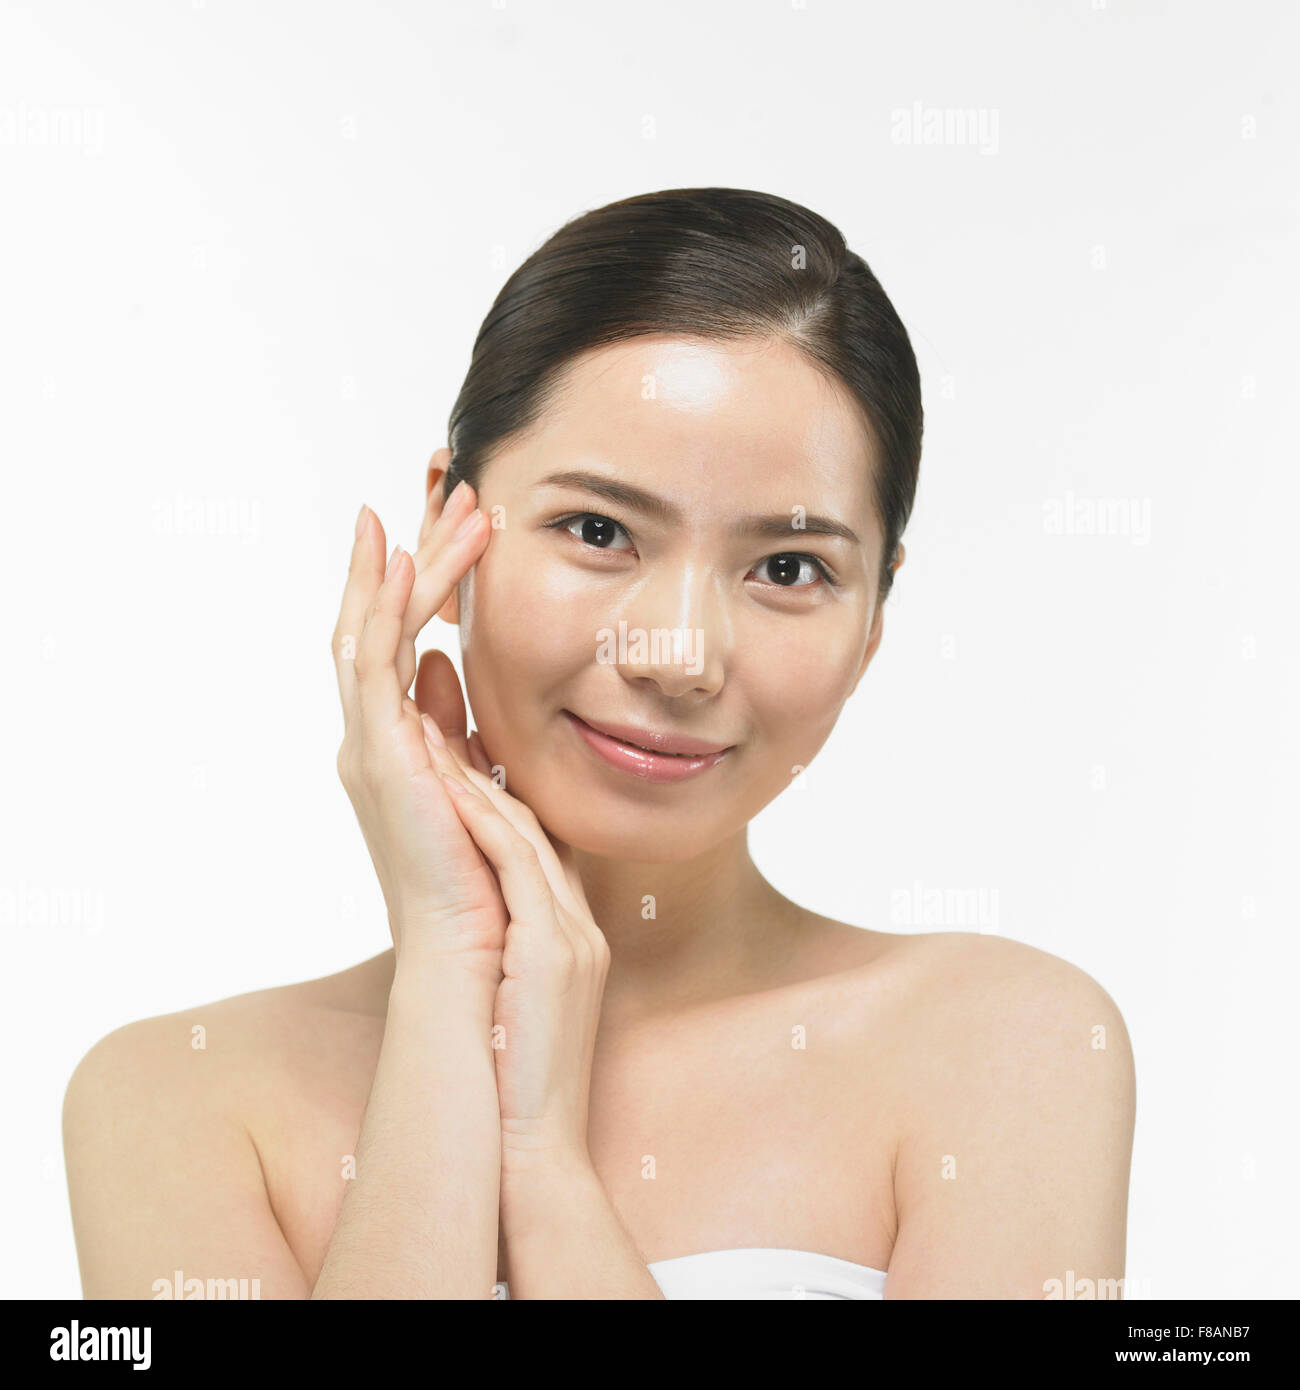 Portrait of smiling Korean woman staring at front touching her face Stock Photo